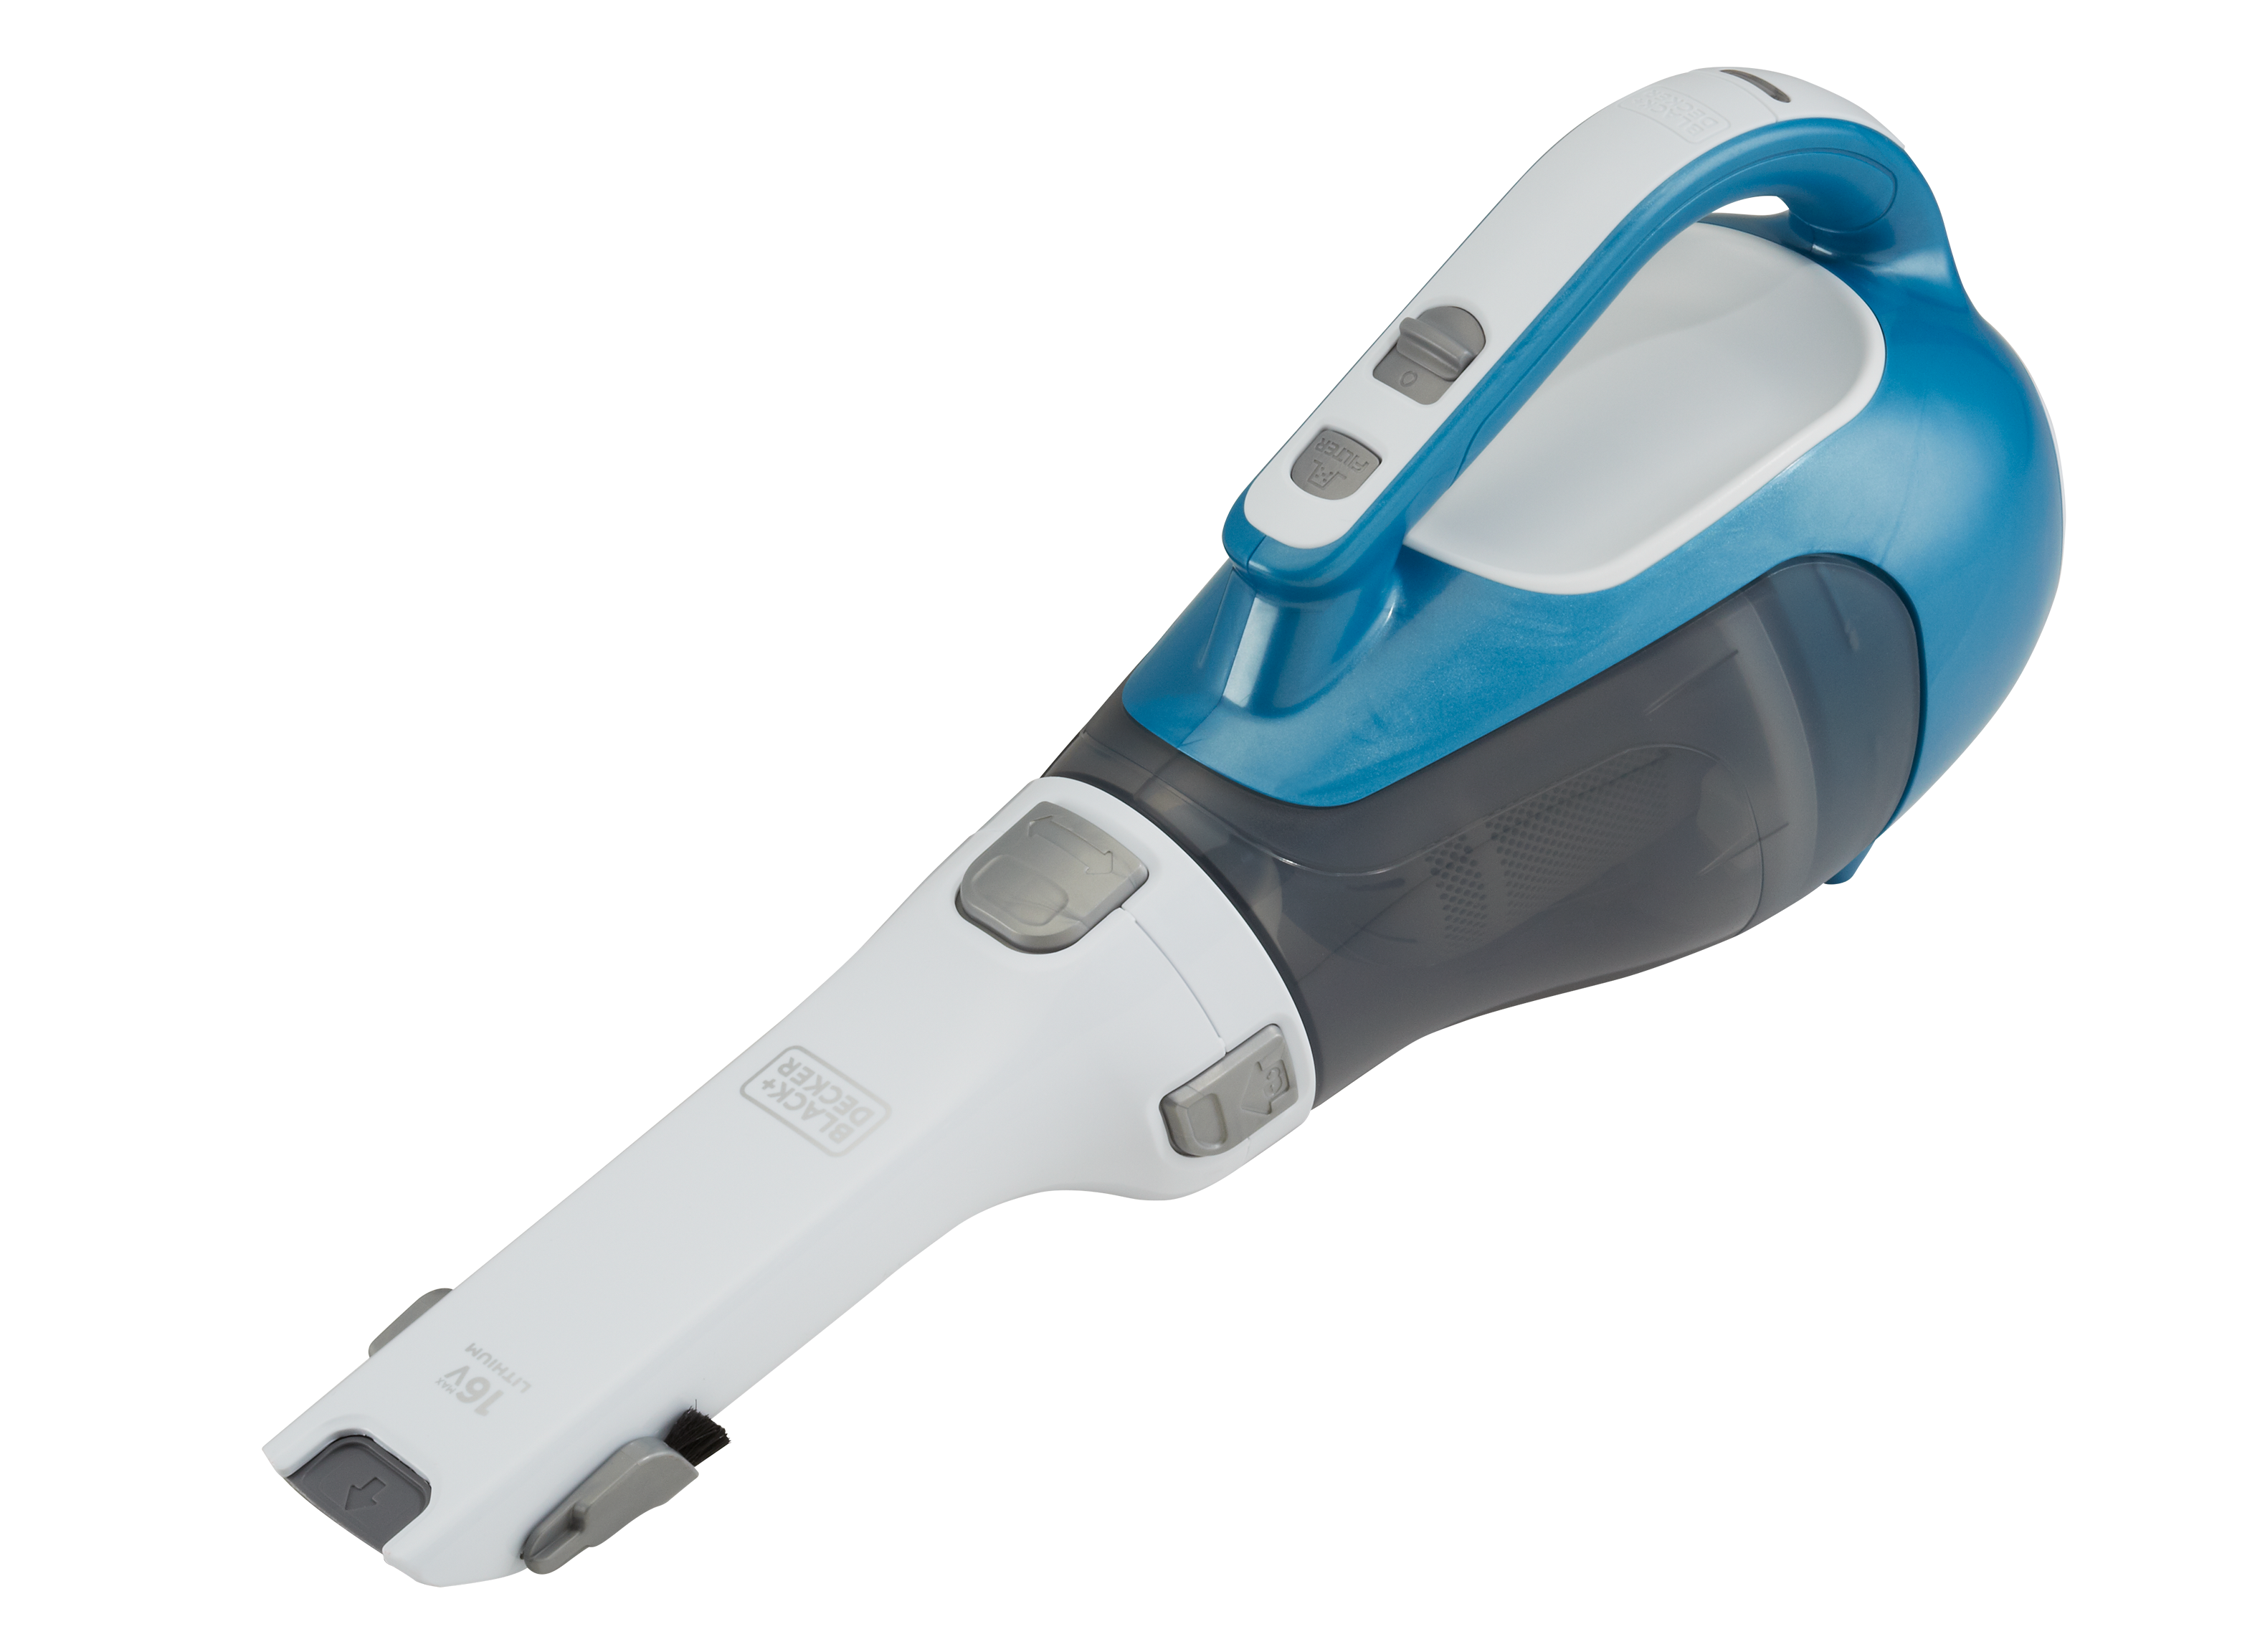 Black+Decker DustBuster CHV1410L Vacuum Cleaner Review - Consumer Reports